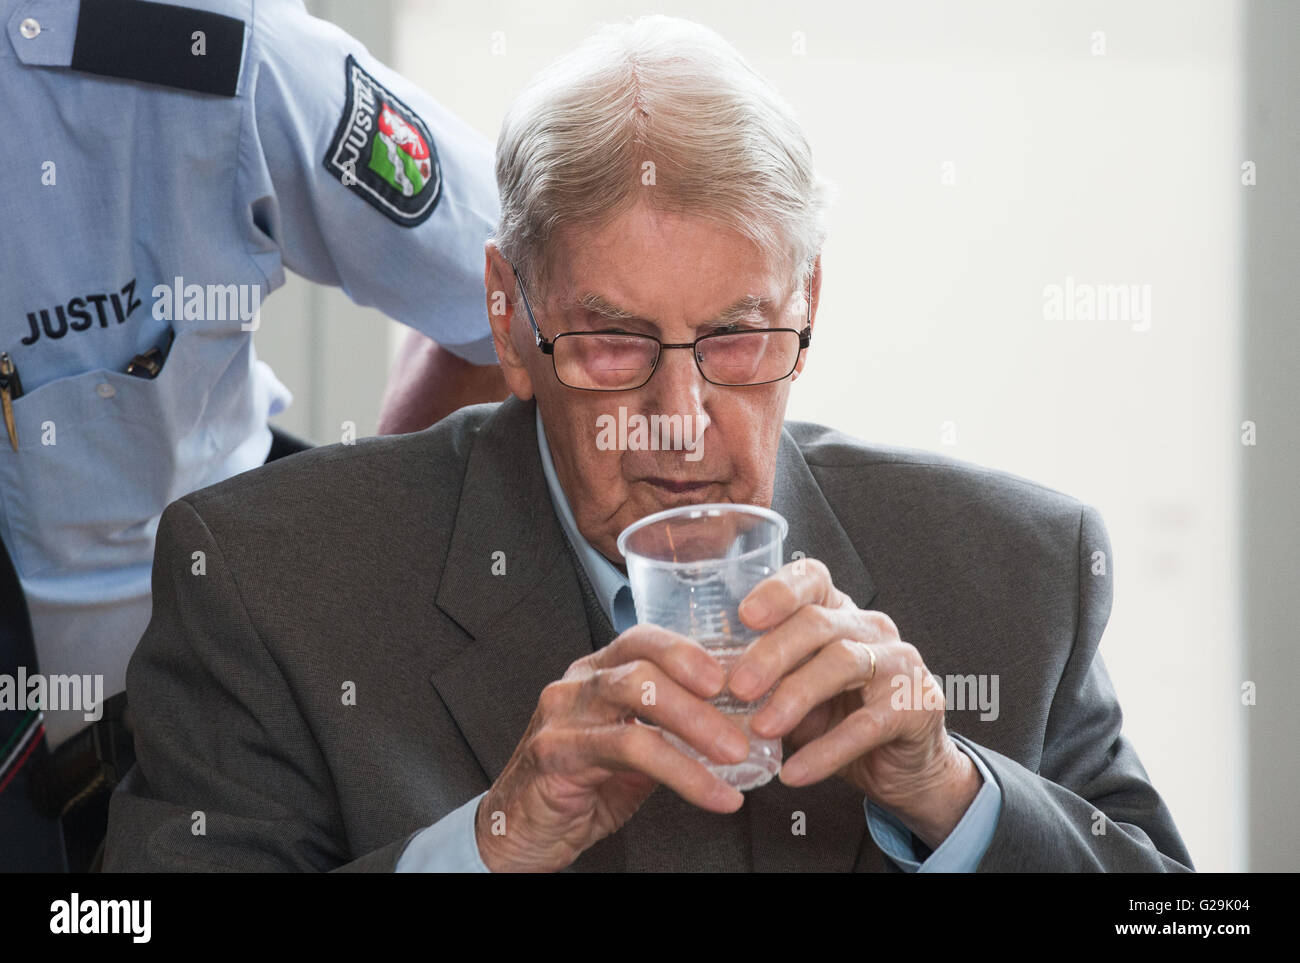 Detmold, Germany. 27th May, 2016. Defendant Reinhold Hanning attends a session of the trial against him, in Detmold, Germany, 27 May 2016. The 94-year-old World War II SS guard is facing a charge of being an accessory to at least 170,000 murders at Auschwitz concentration camp. Prosecutors state that he was a member of the SS 'Totenkopf' (Death's Head) Division and that he was stationed at the Nazi regime's death camp between early 1943 and June 1944. Photo: Bernd Thissen/dpa/Alamy Live News Stock Photo